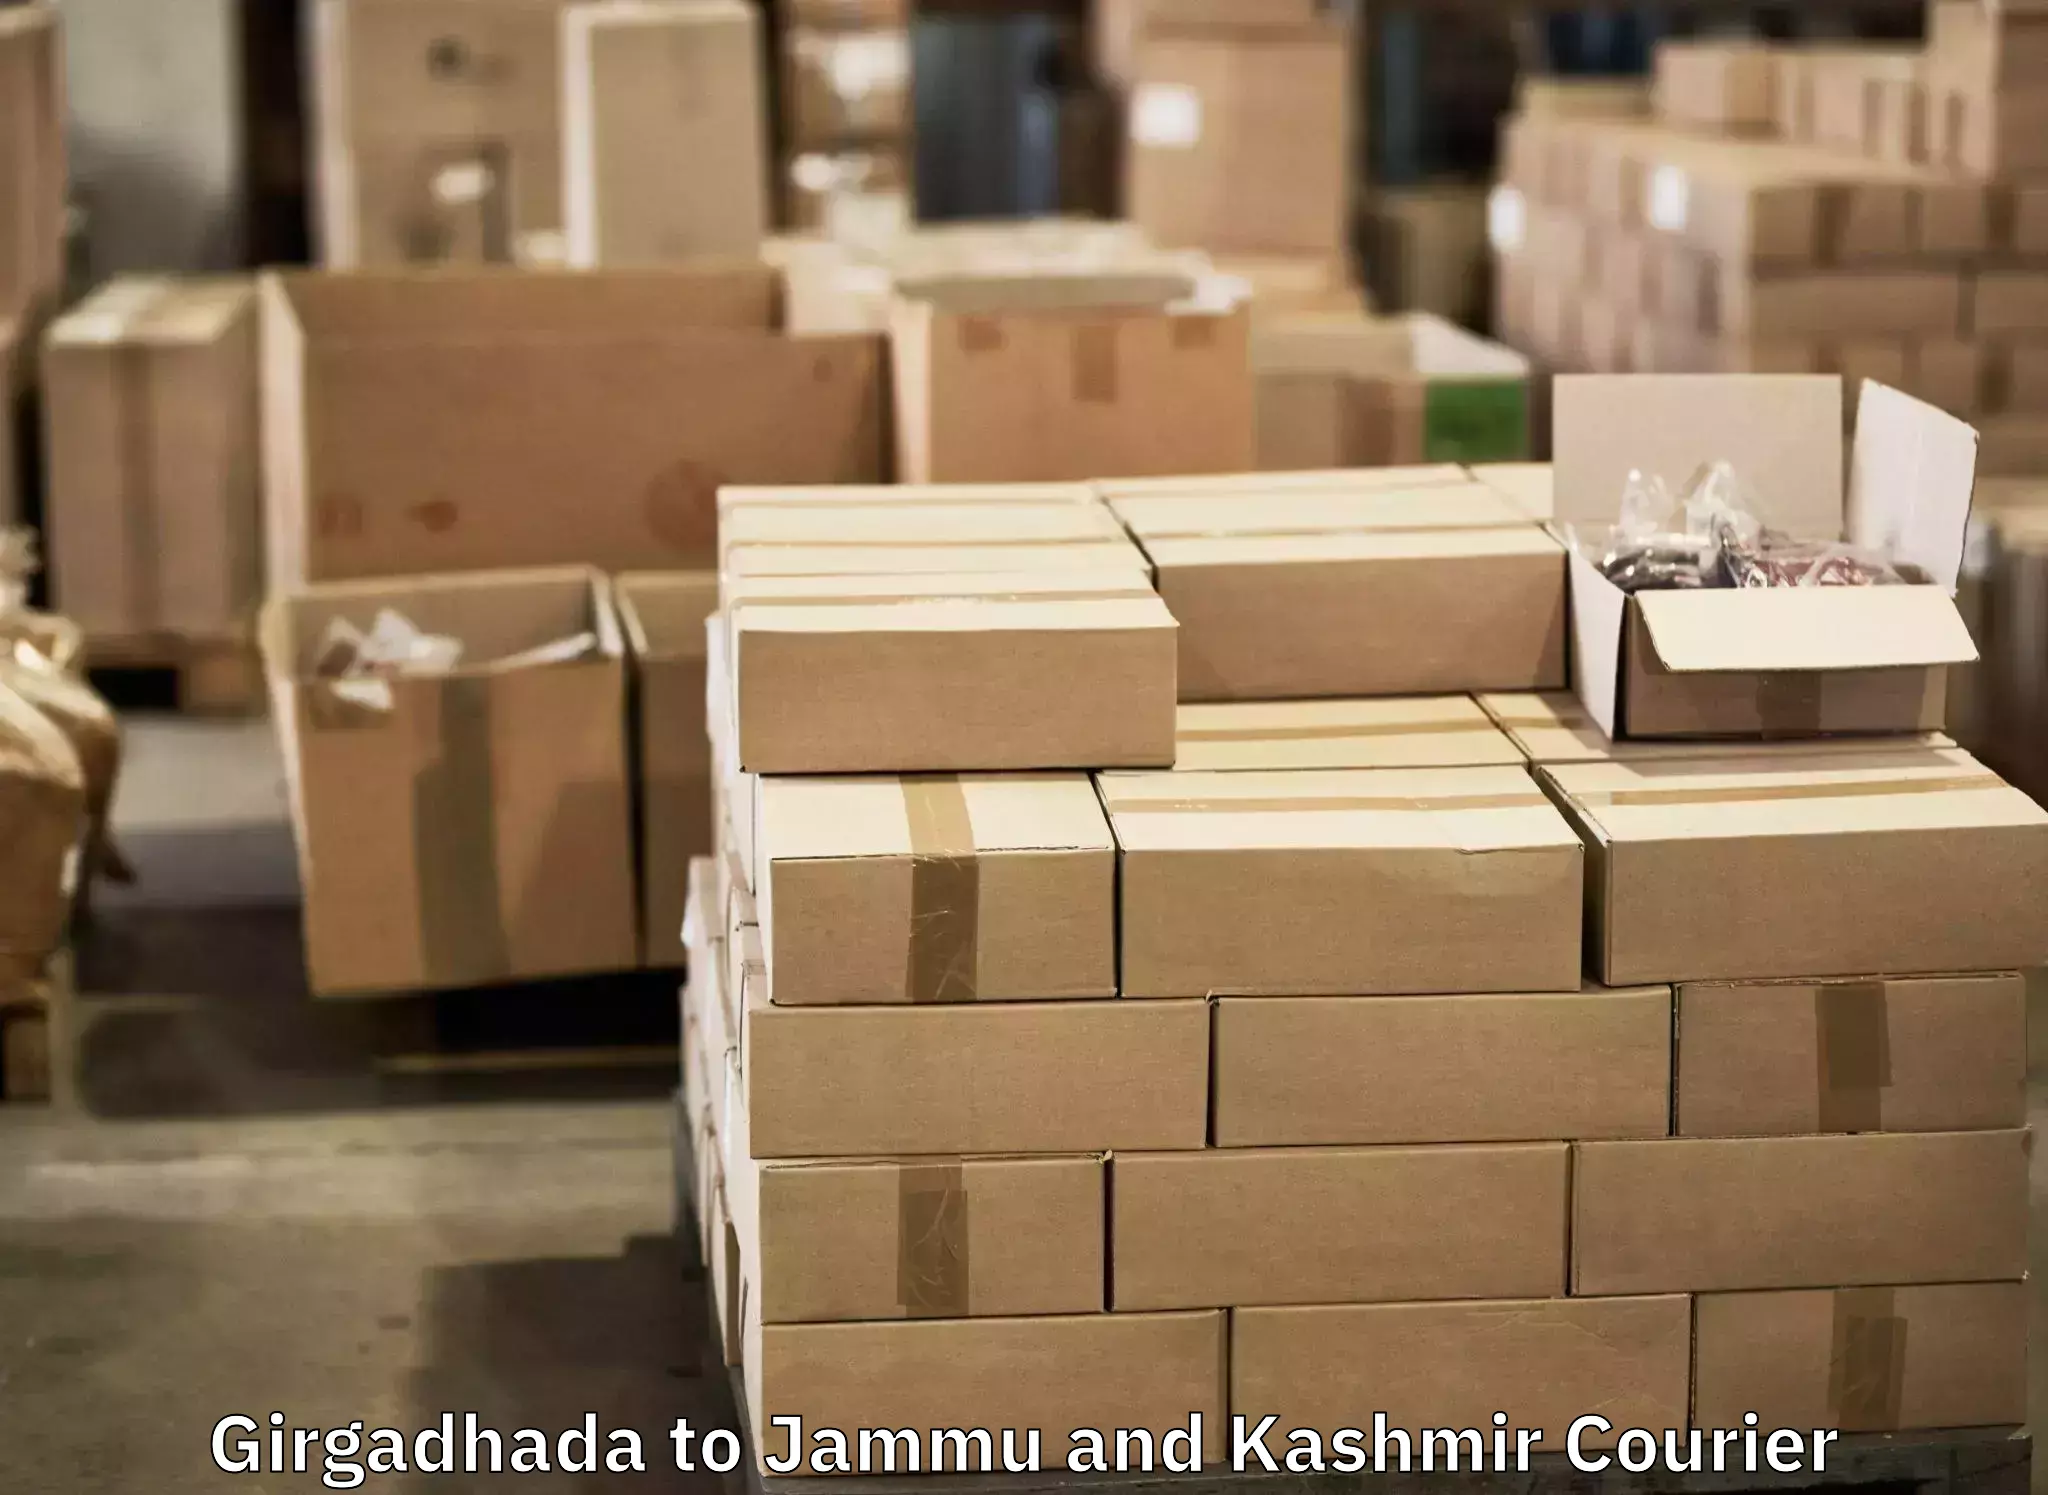 Luggage delivery logistics in Girgadhada to Sopore